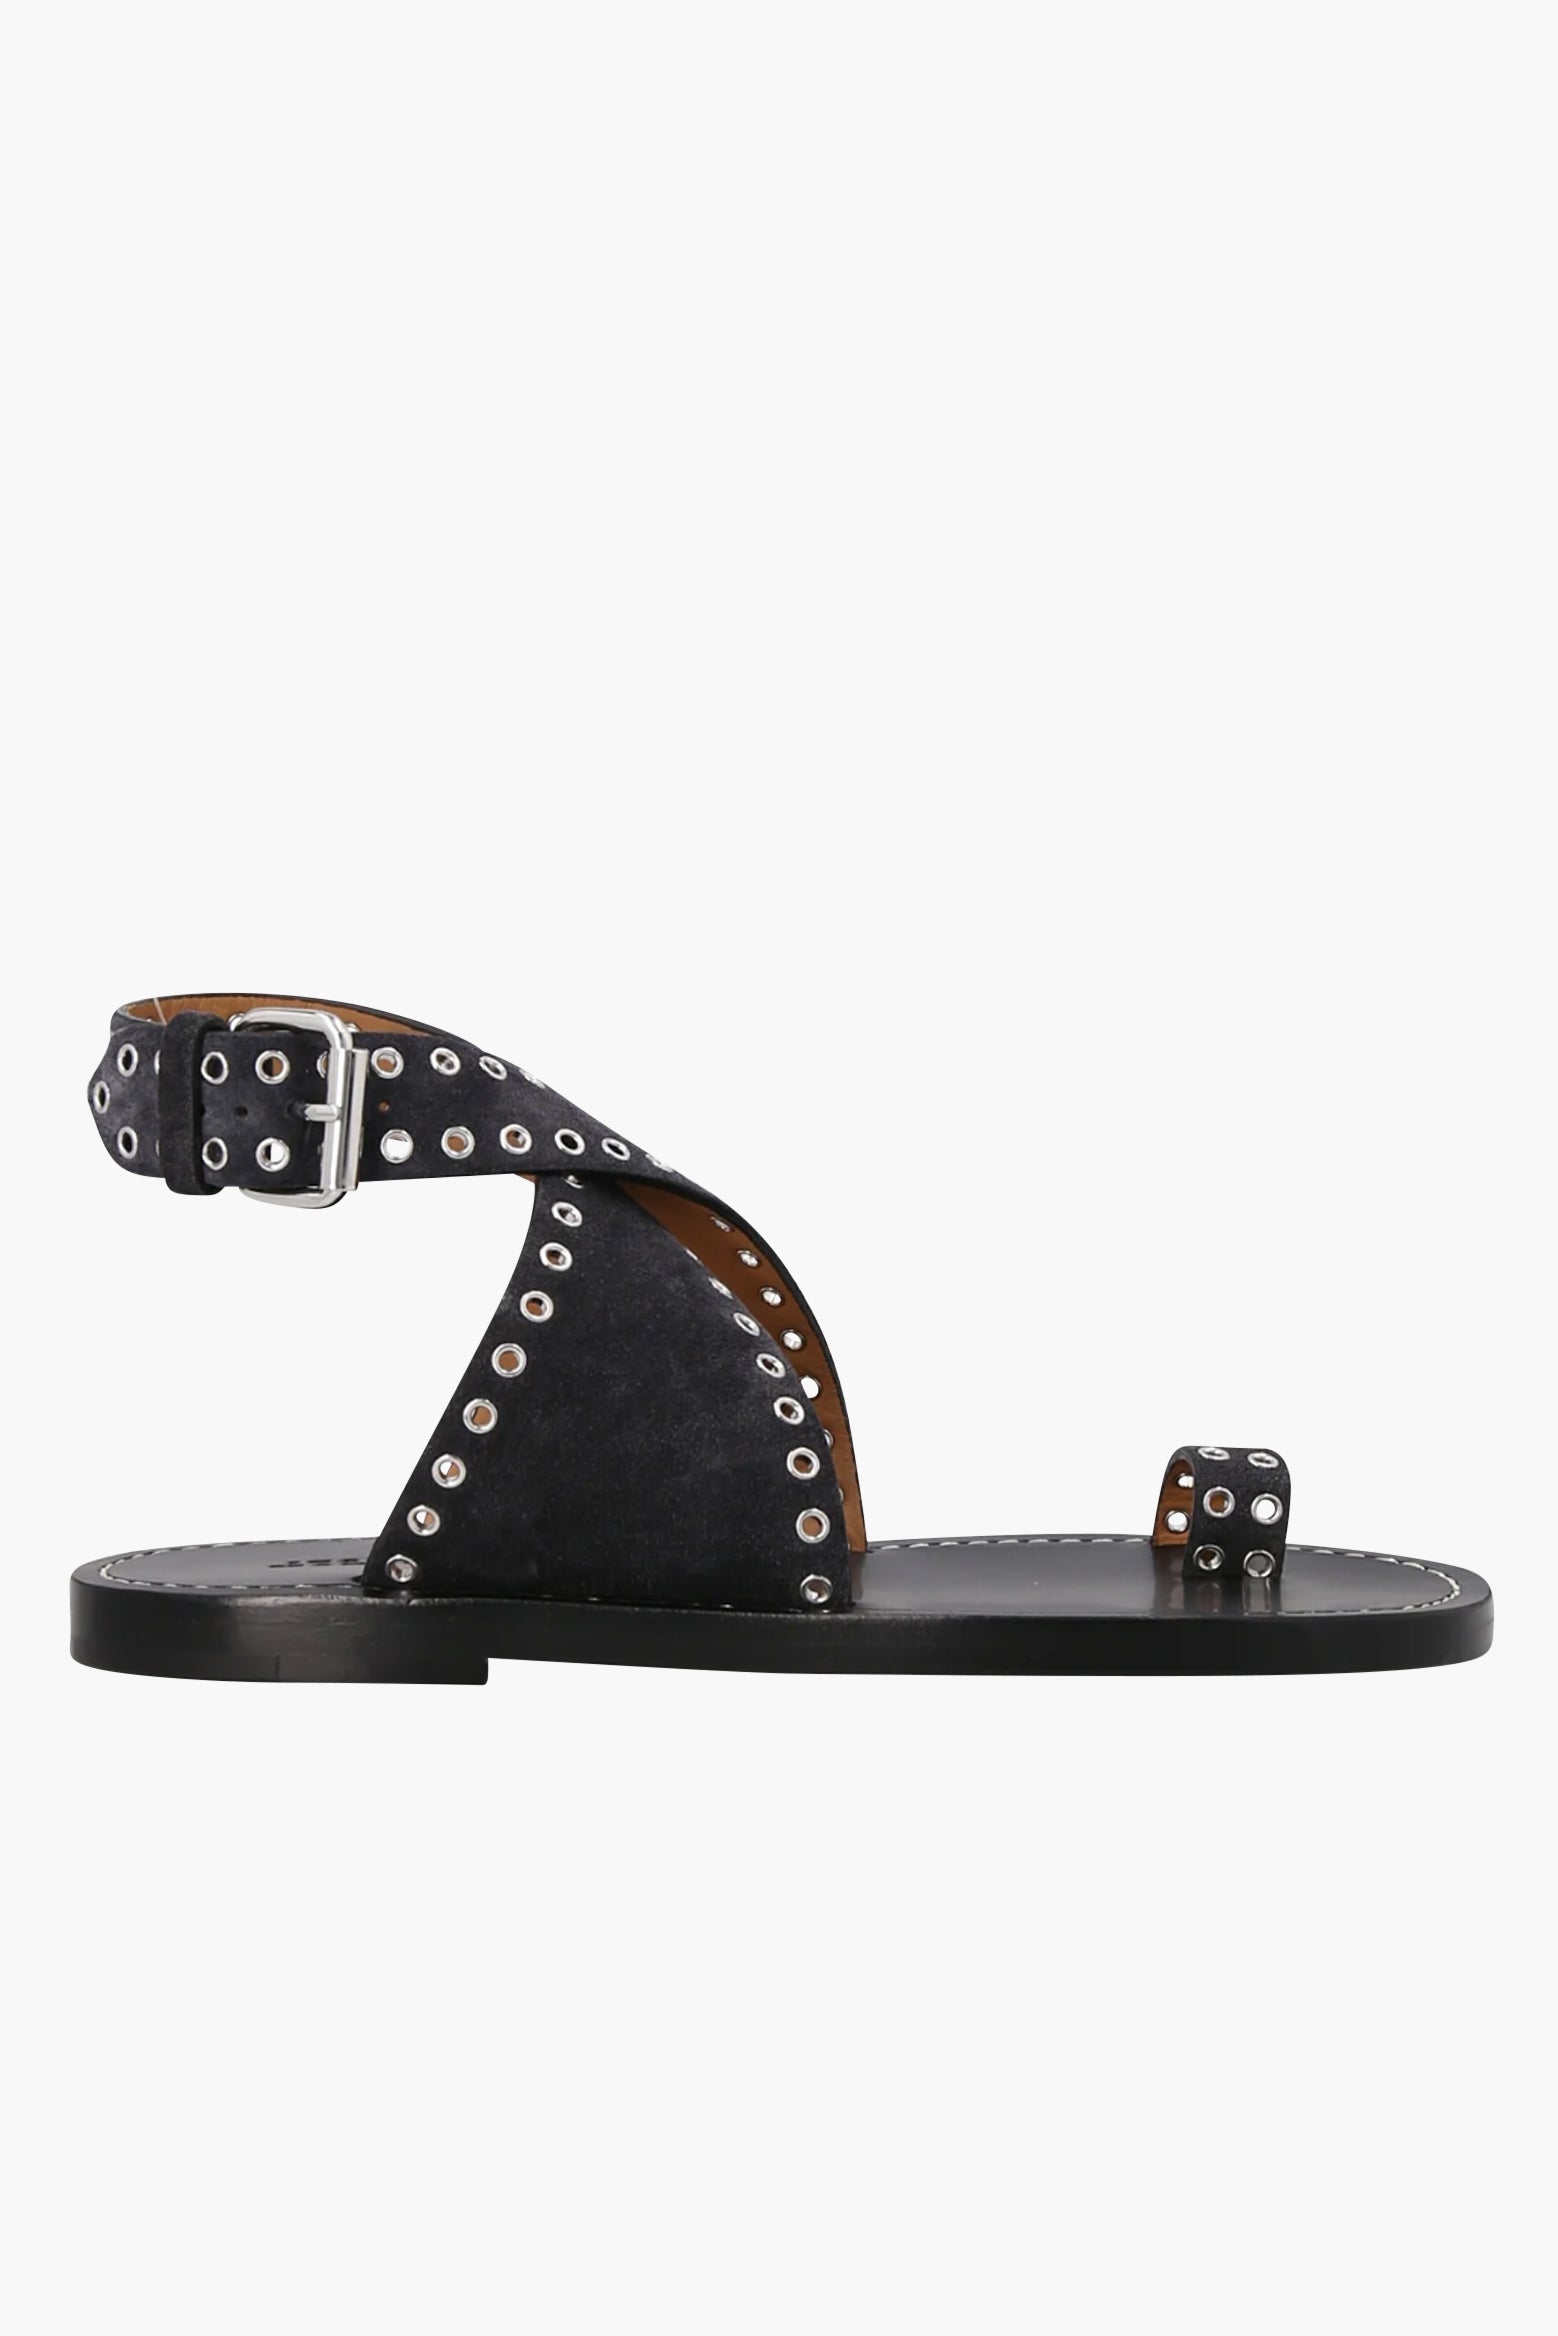 Isabel Marant Jools Sandals in Black Midnight from The New Trend